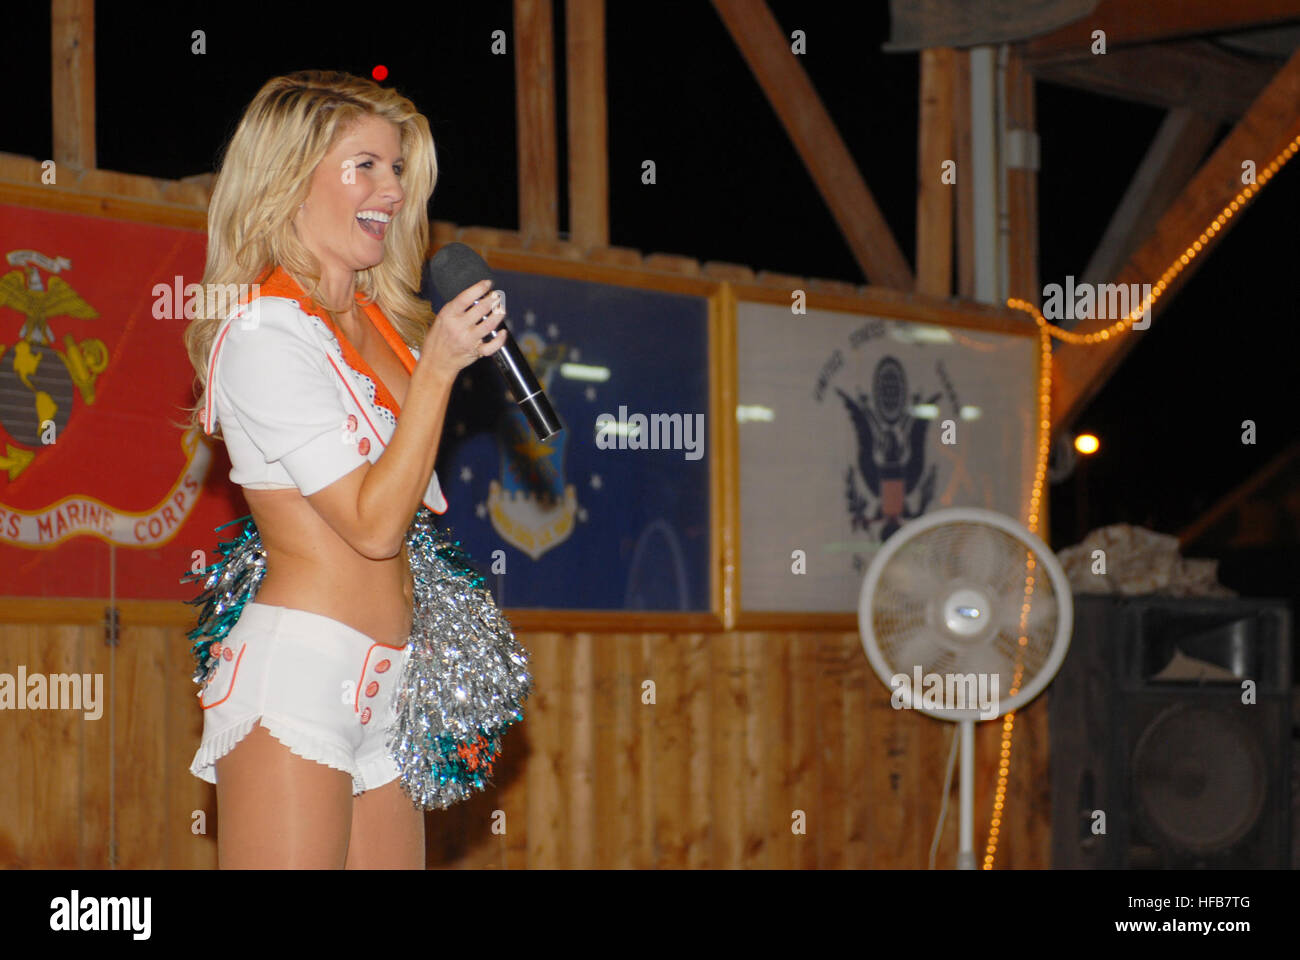 Miami Dolphins' cheerleaders entertained Soldiers, Sailors, Marines and Airmen on a tour of the area. They performed a few dance routines and signed autographs for the troops. Dolphins cheerleaders Djibouti 10 Stock Photo